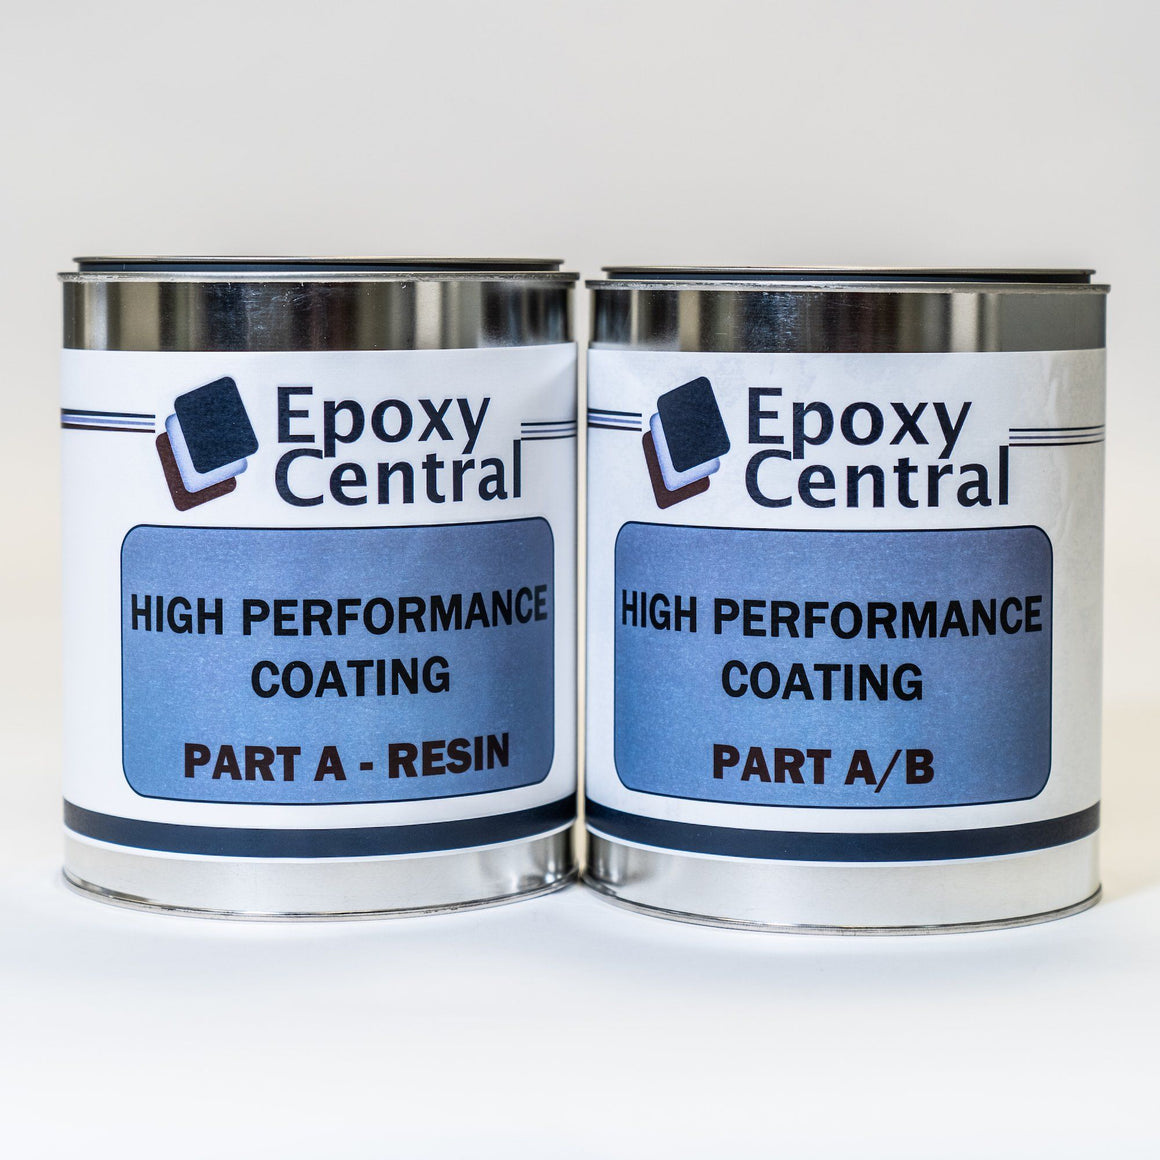 Epoxy putty is strong and versatile